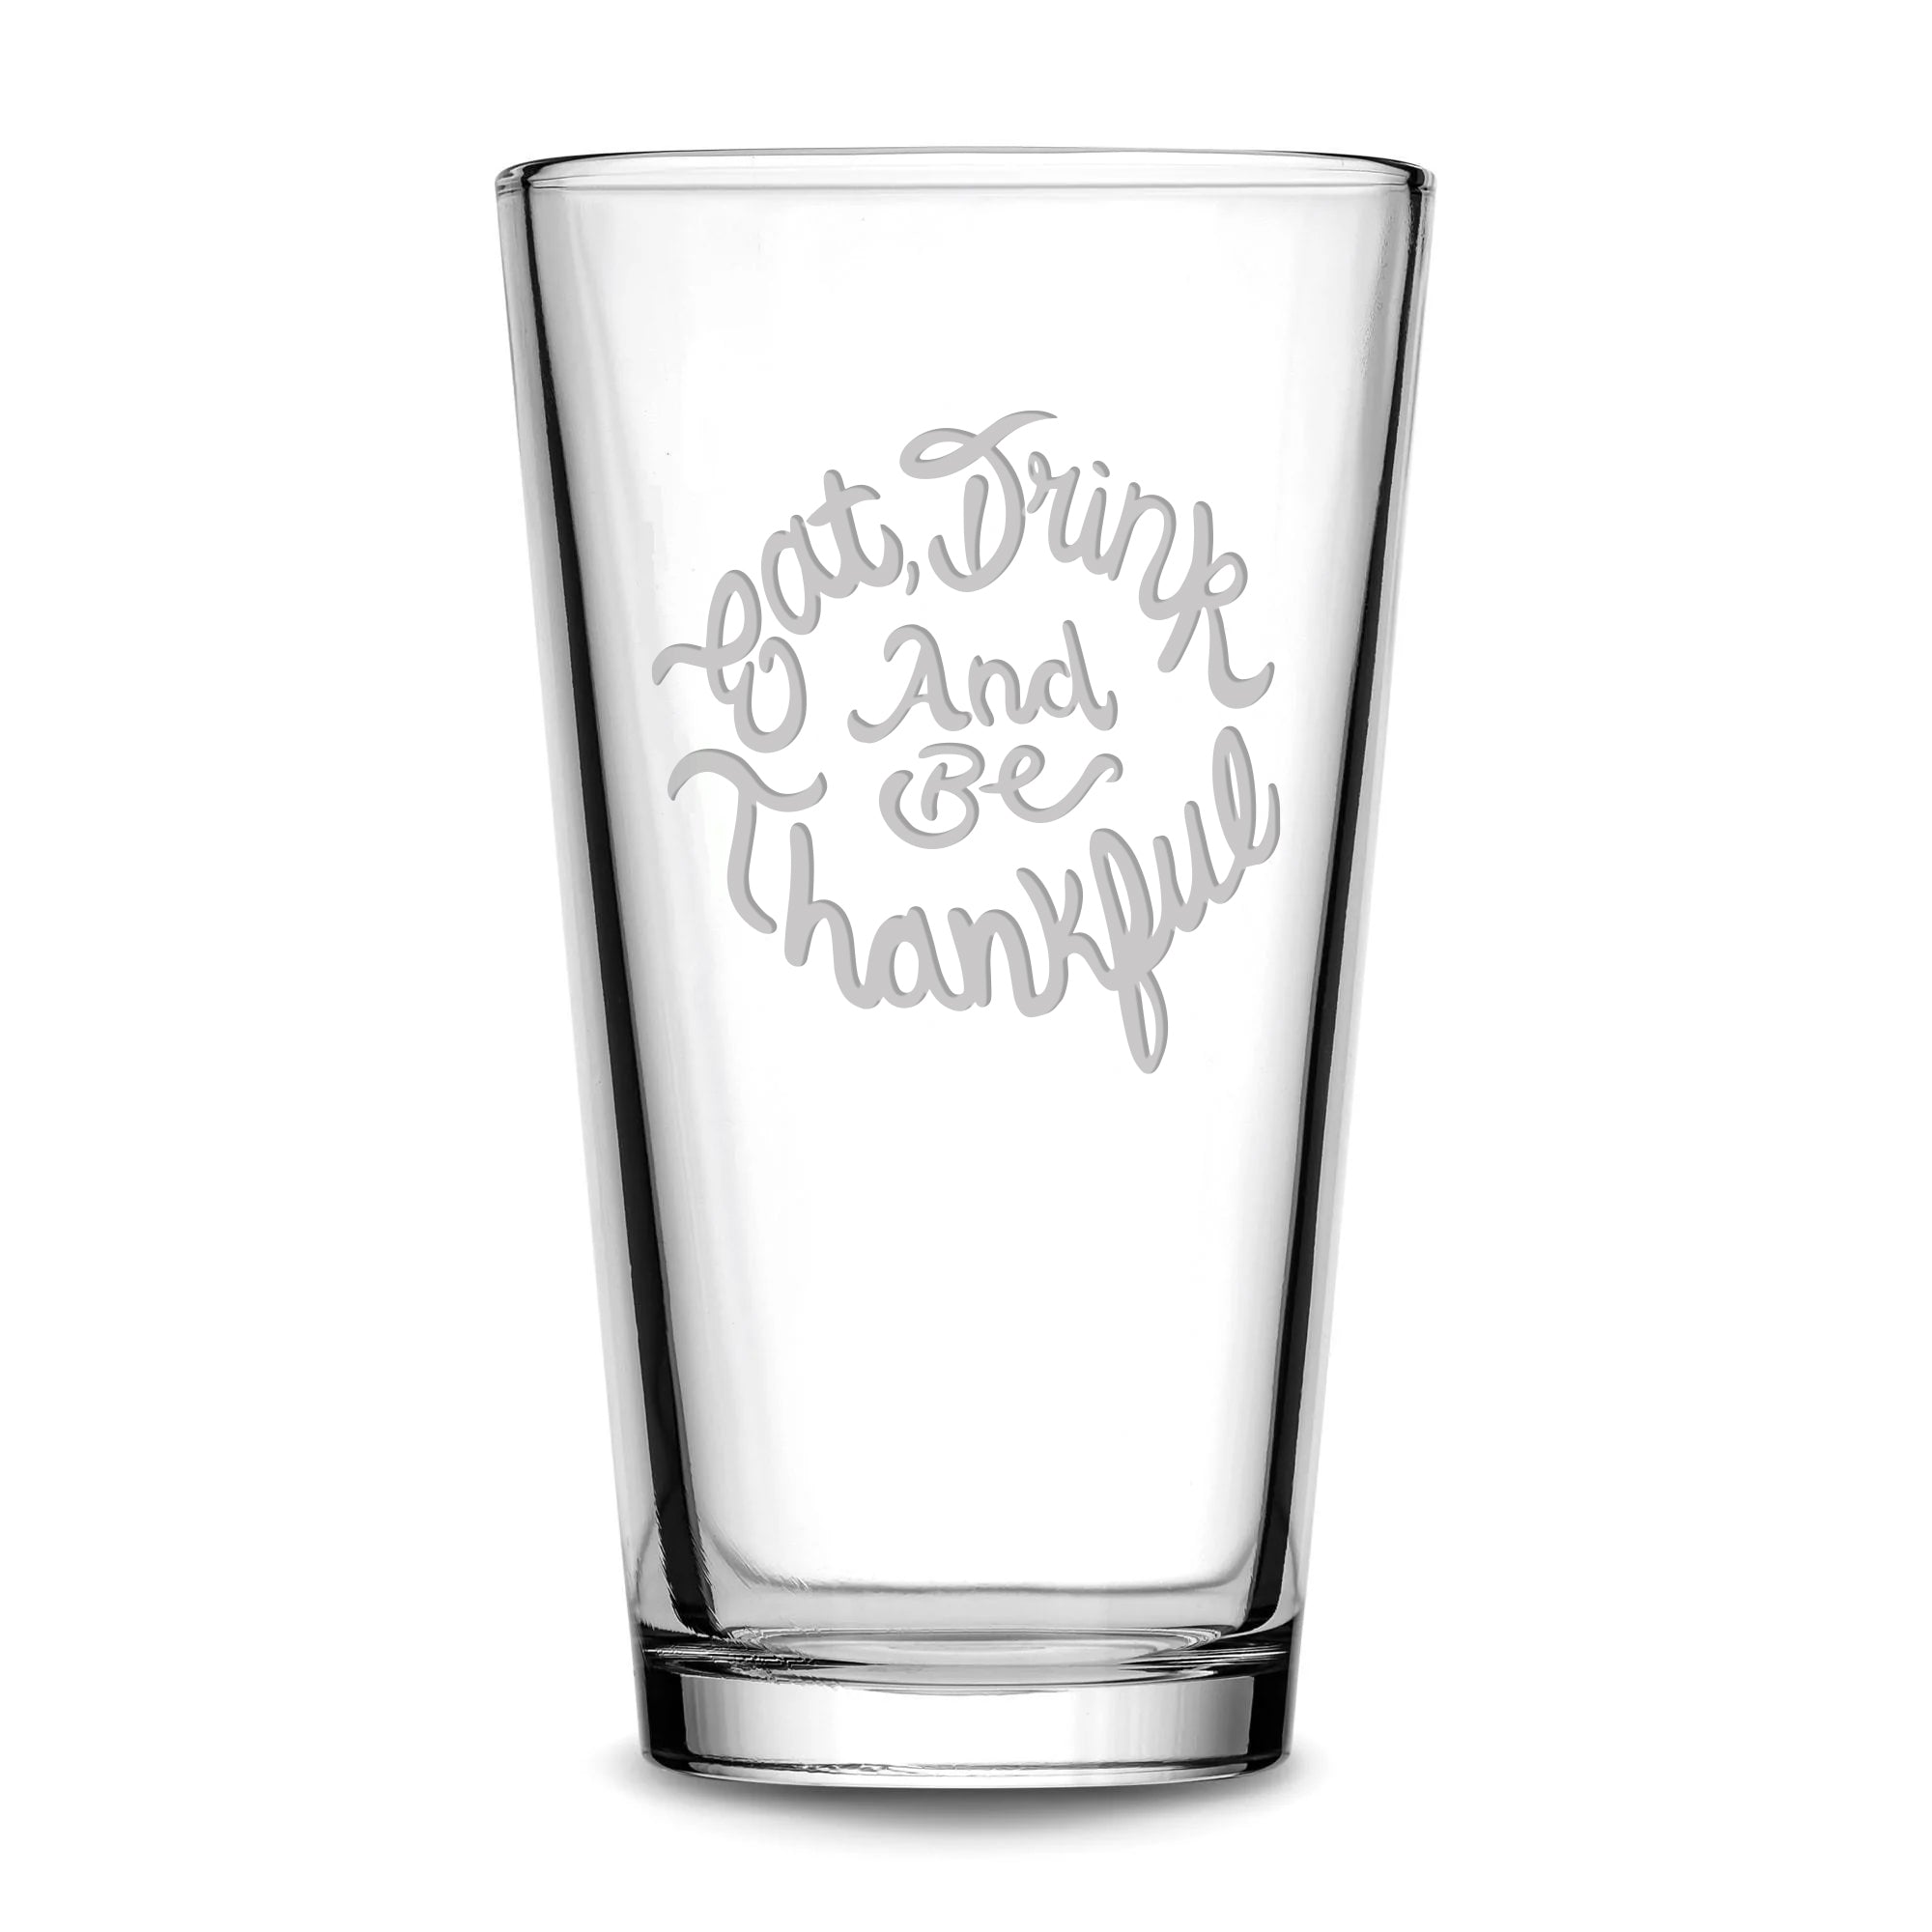 Premium Eat, Drink and Be Thankful, Pint Glass, 16oz, Laser Etched or Hand Etched